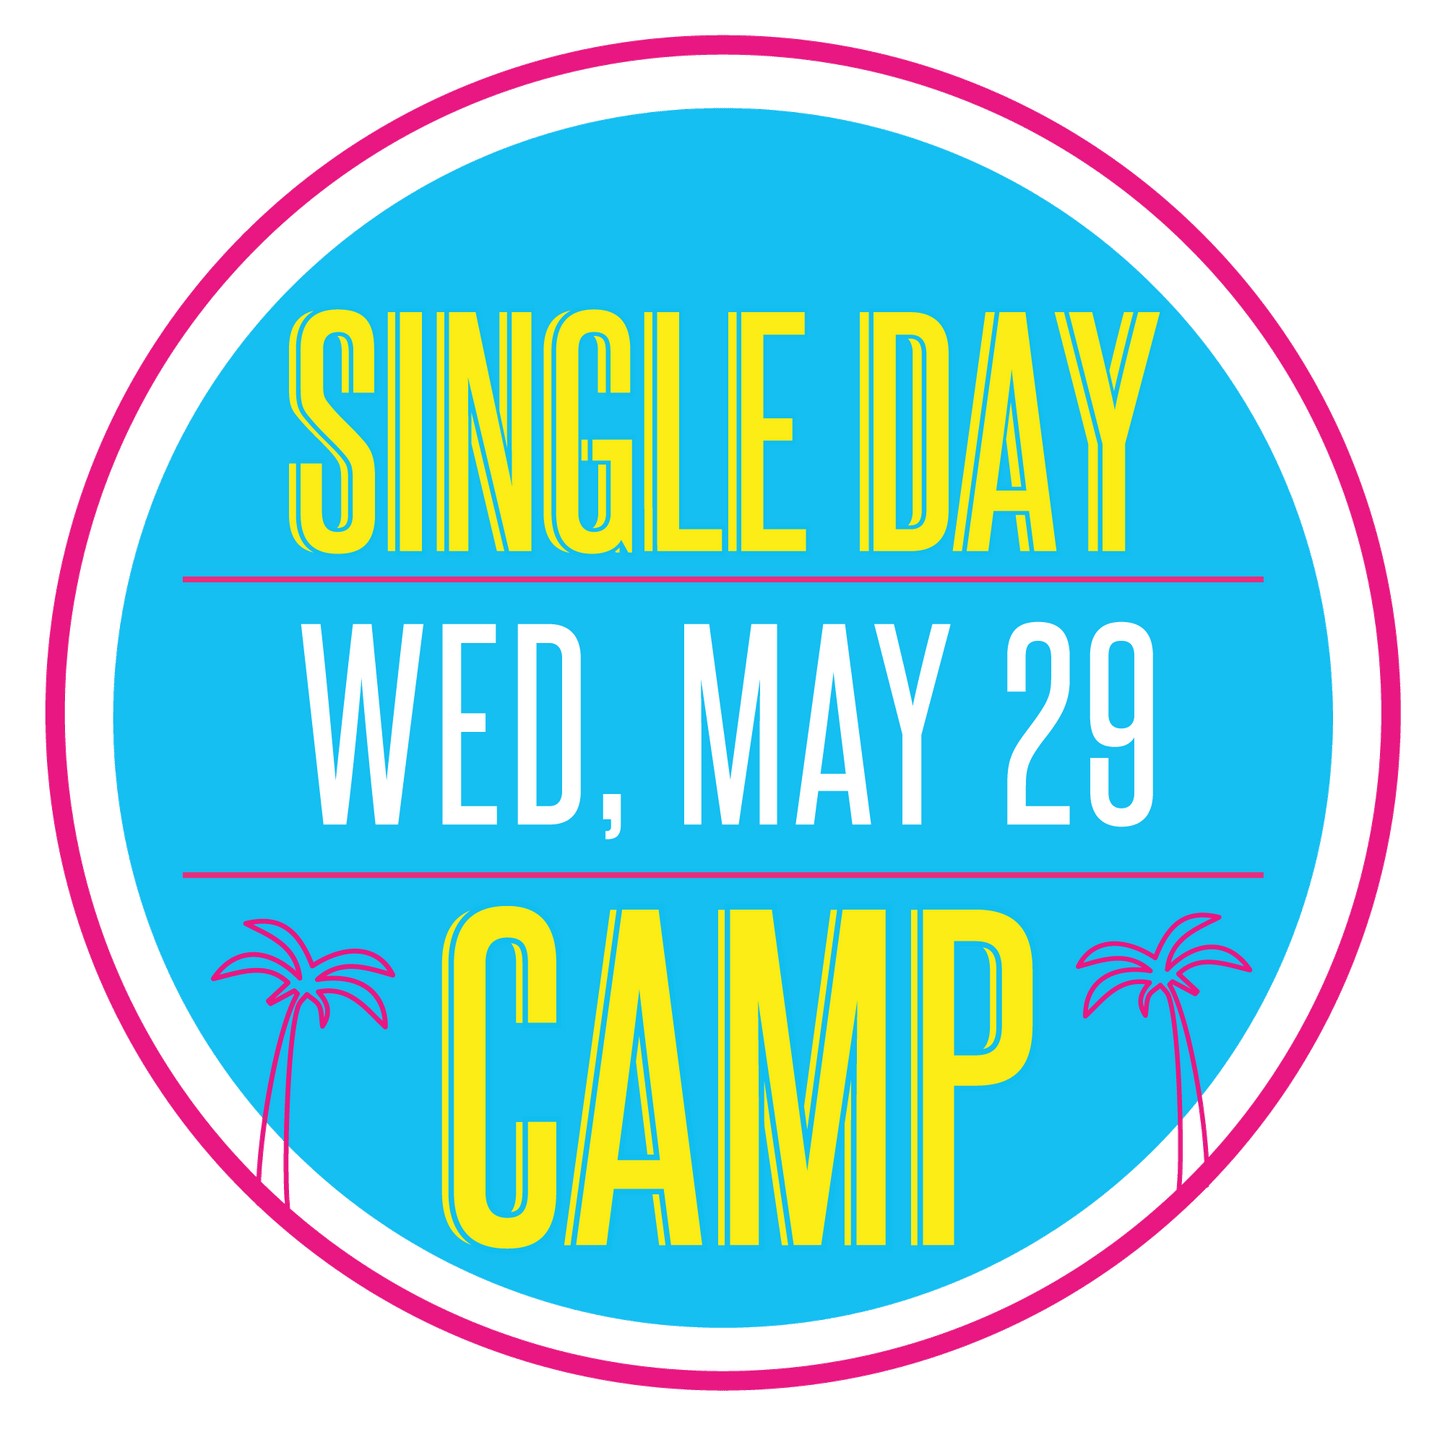 Single Day Sewing Workshop: Wednesday, May 29, 9am-3pm